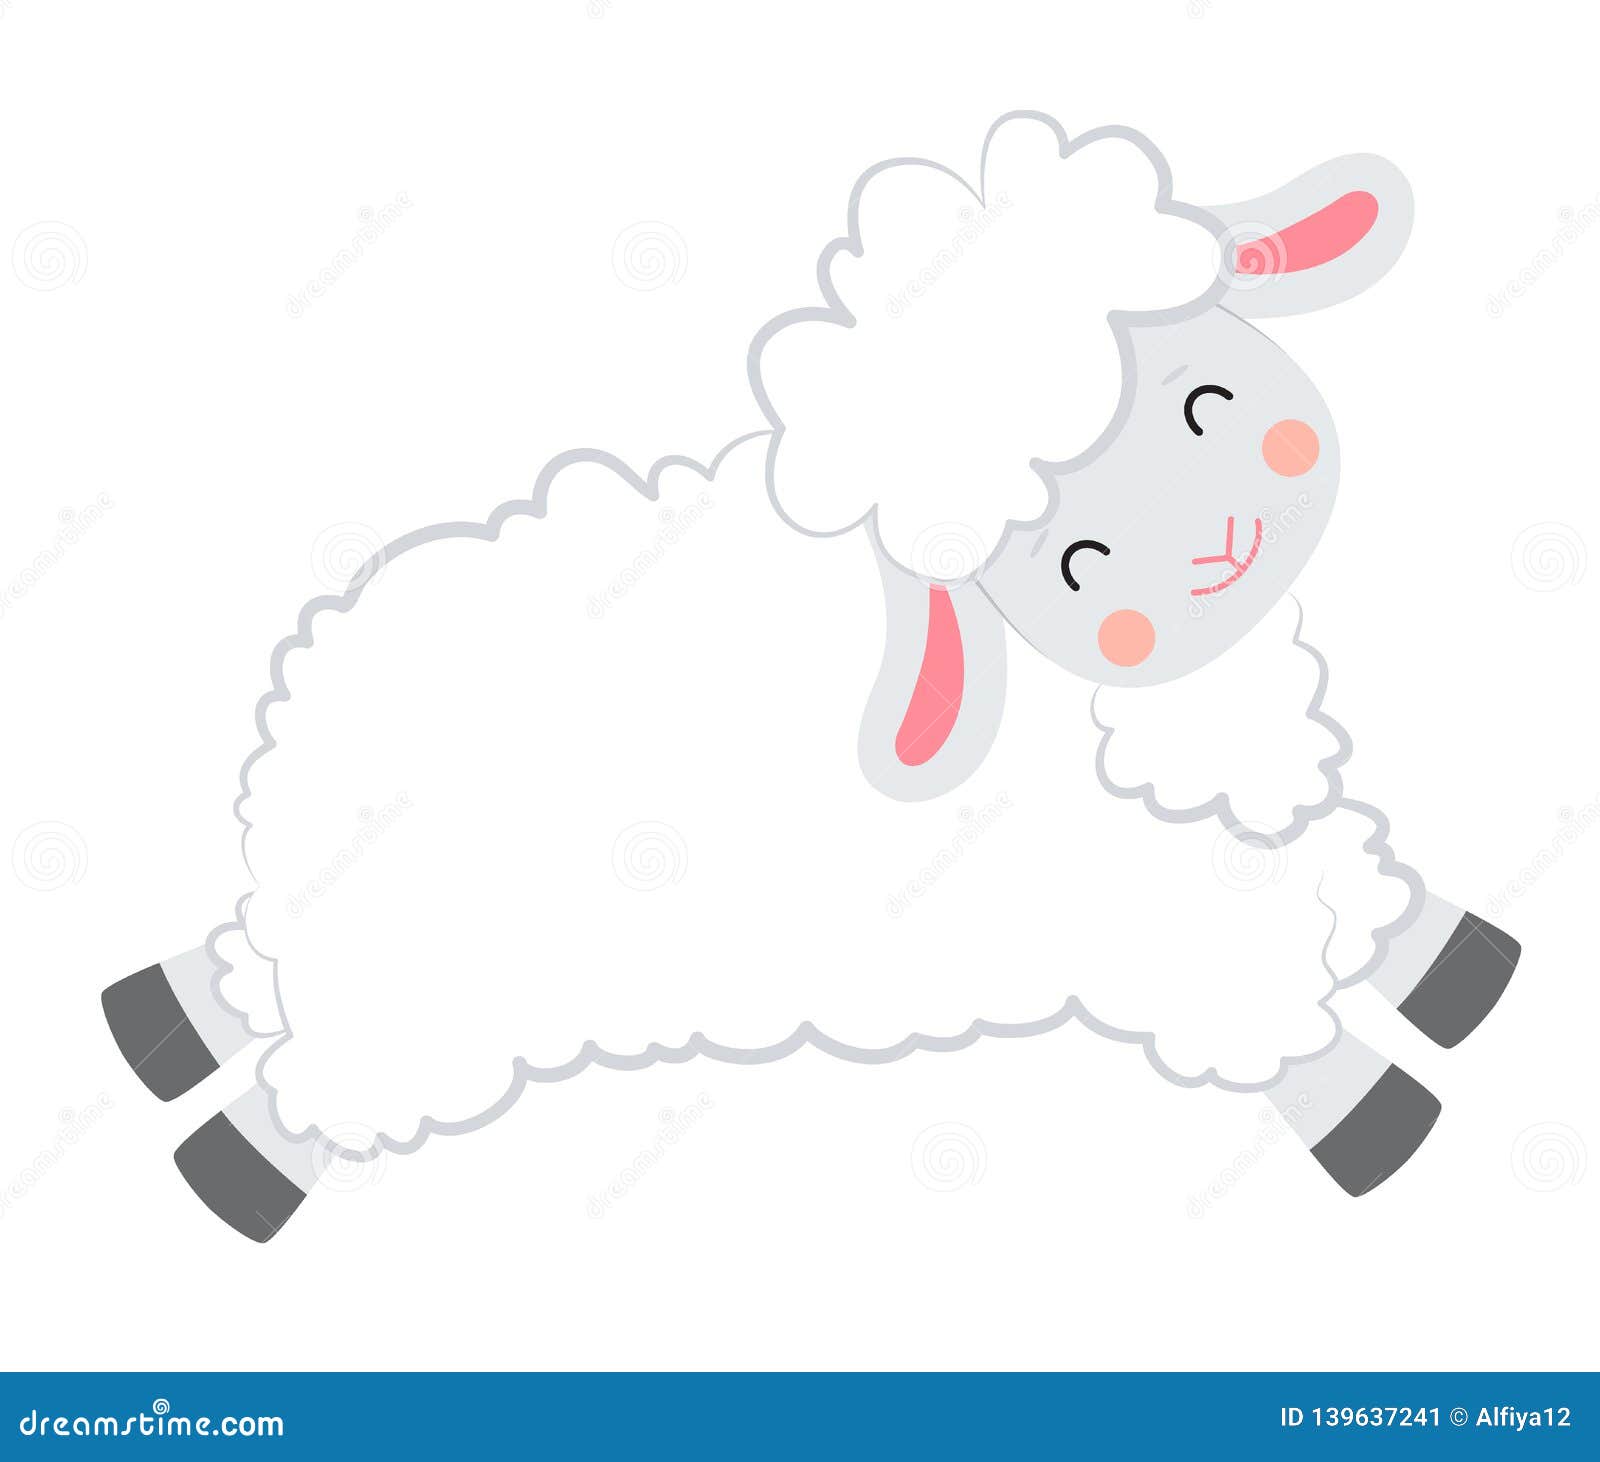 Cartoon Vector Smiling White Sheep Jumping on White Background Stock Vector  - Illustration of adha, jumping: 139637241